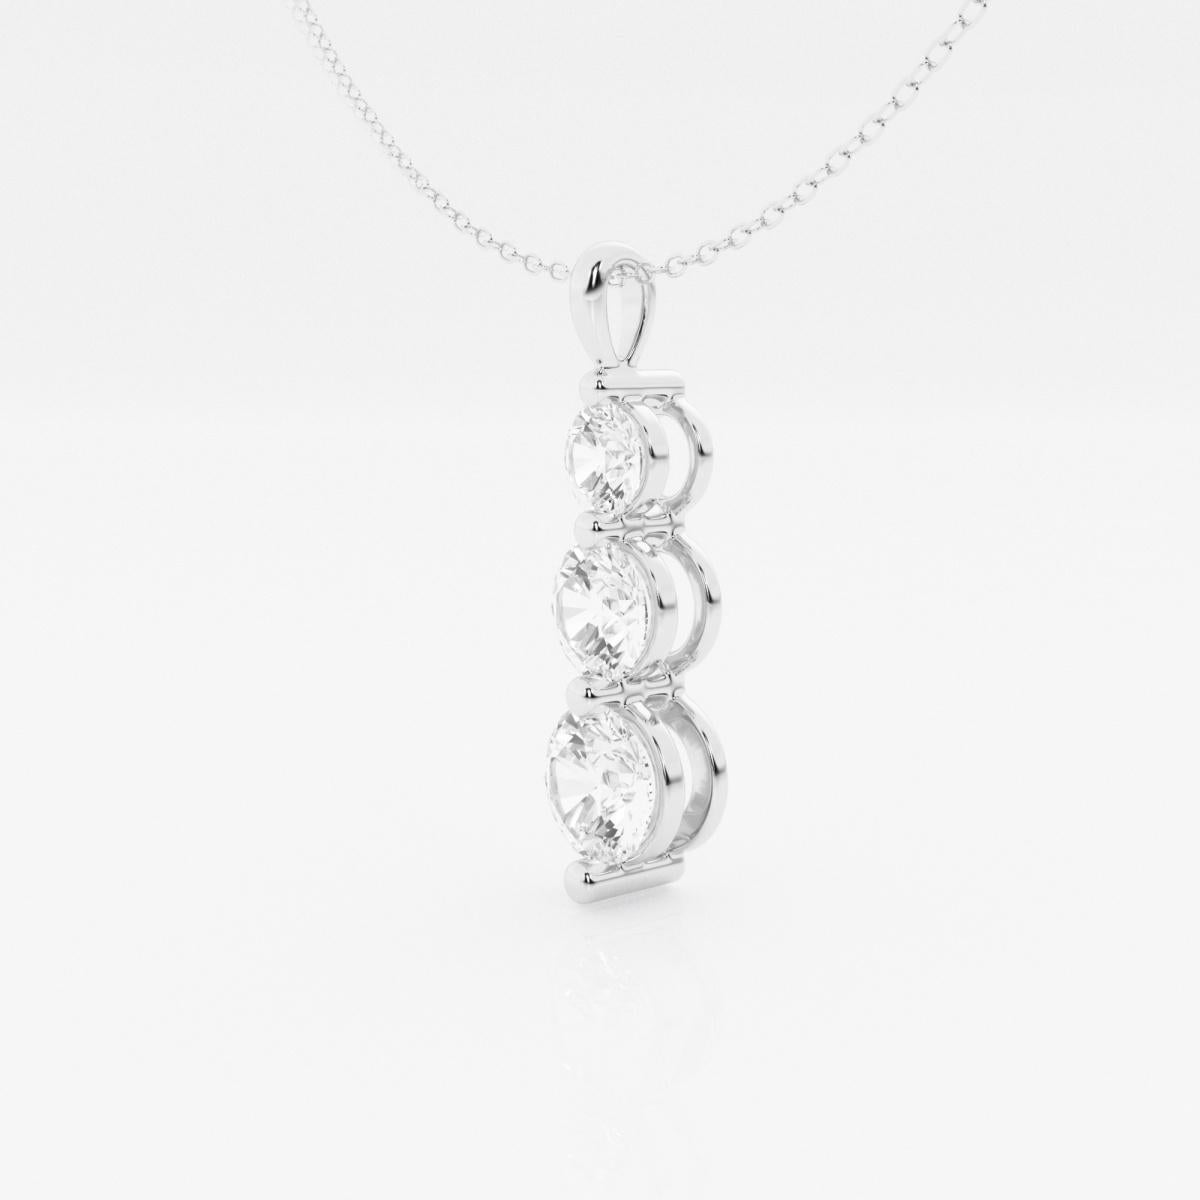 This impressive three-stone round diamond pendant is finely crafted in brightly polished 14 karat white gold and features three stones totaling a carat weight of 0.25CTW. These diamonds are SI clarity. Ideal as an anniversary or birthday present,